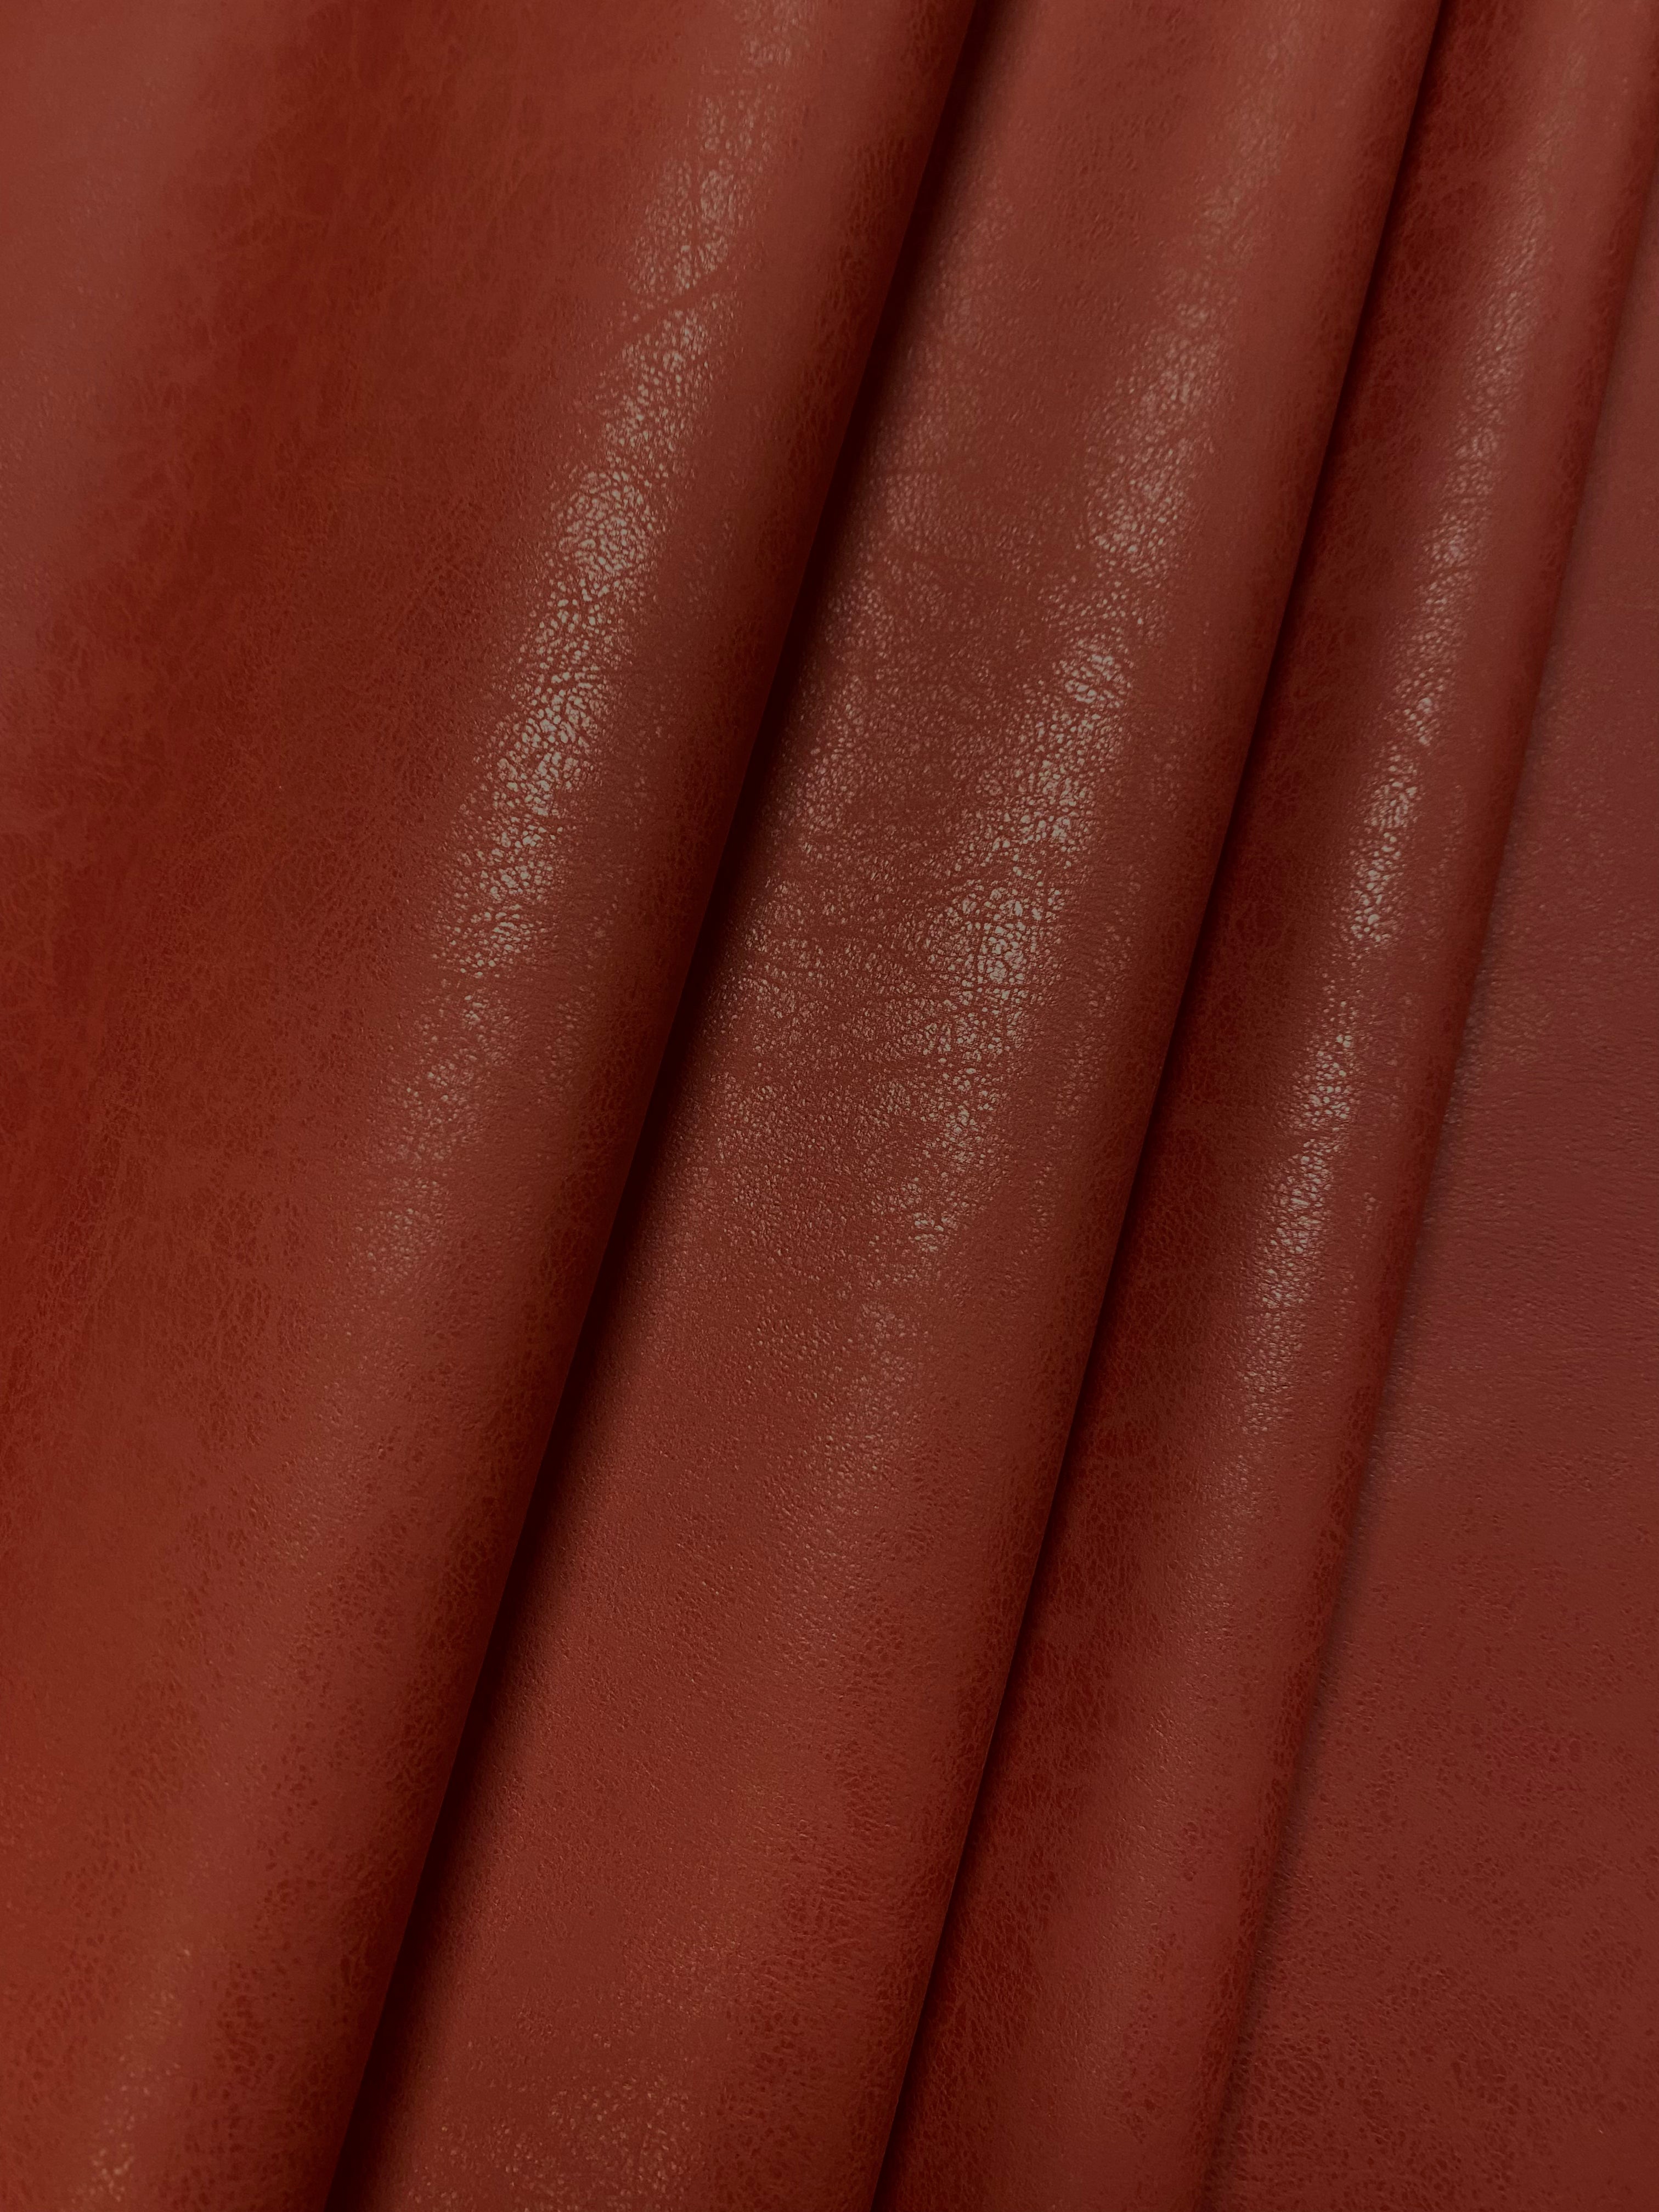 Cherry Red Faux Leather Vinyl, Fabric Bistro, Columbia